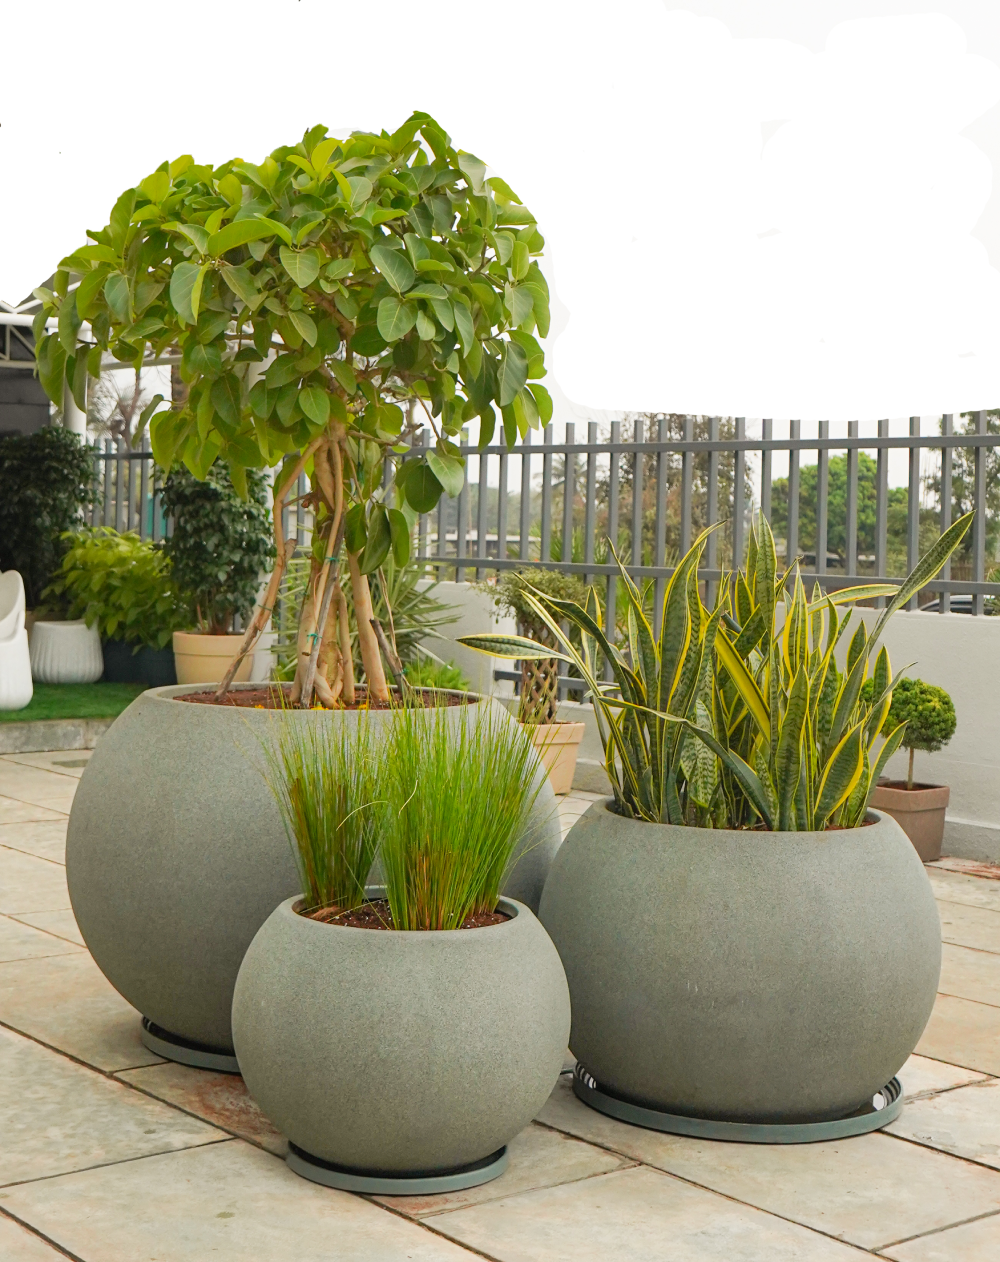 large outdoor pots, pots for outdoor plants, large outdoor pots for plants, garden outdoor pots, large flower pots planters, plant pots & planters, decorative pots, big pots for outdoor plants, garden pots, plastic garden pots, outdoor pots for flowers, ideas for outdoor pots & plants, outdoor pots online, Harshdeep India